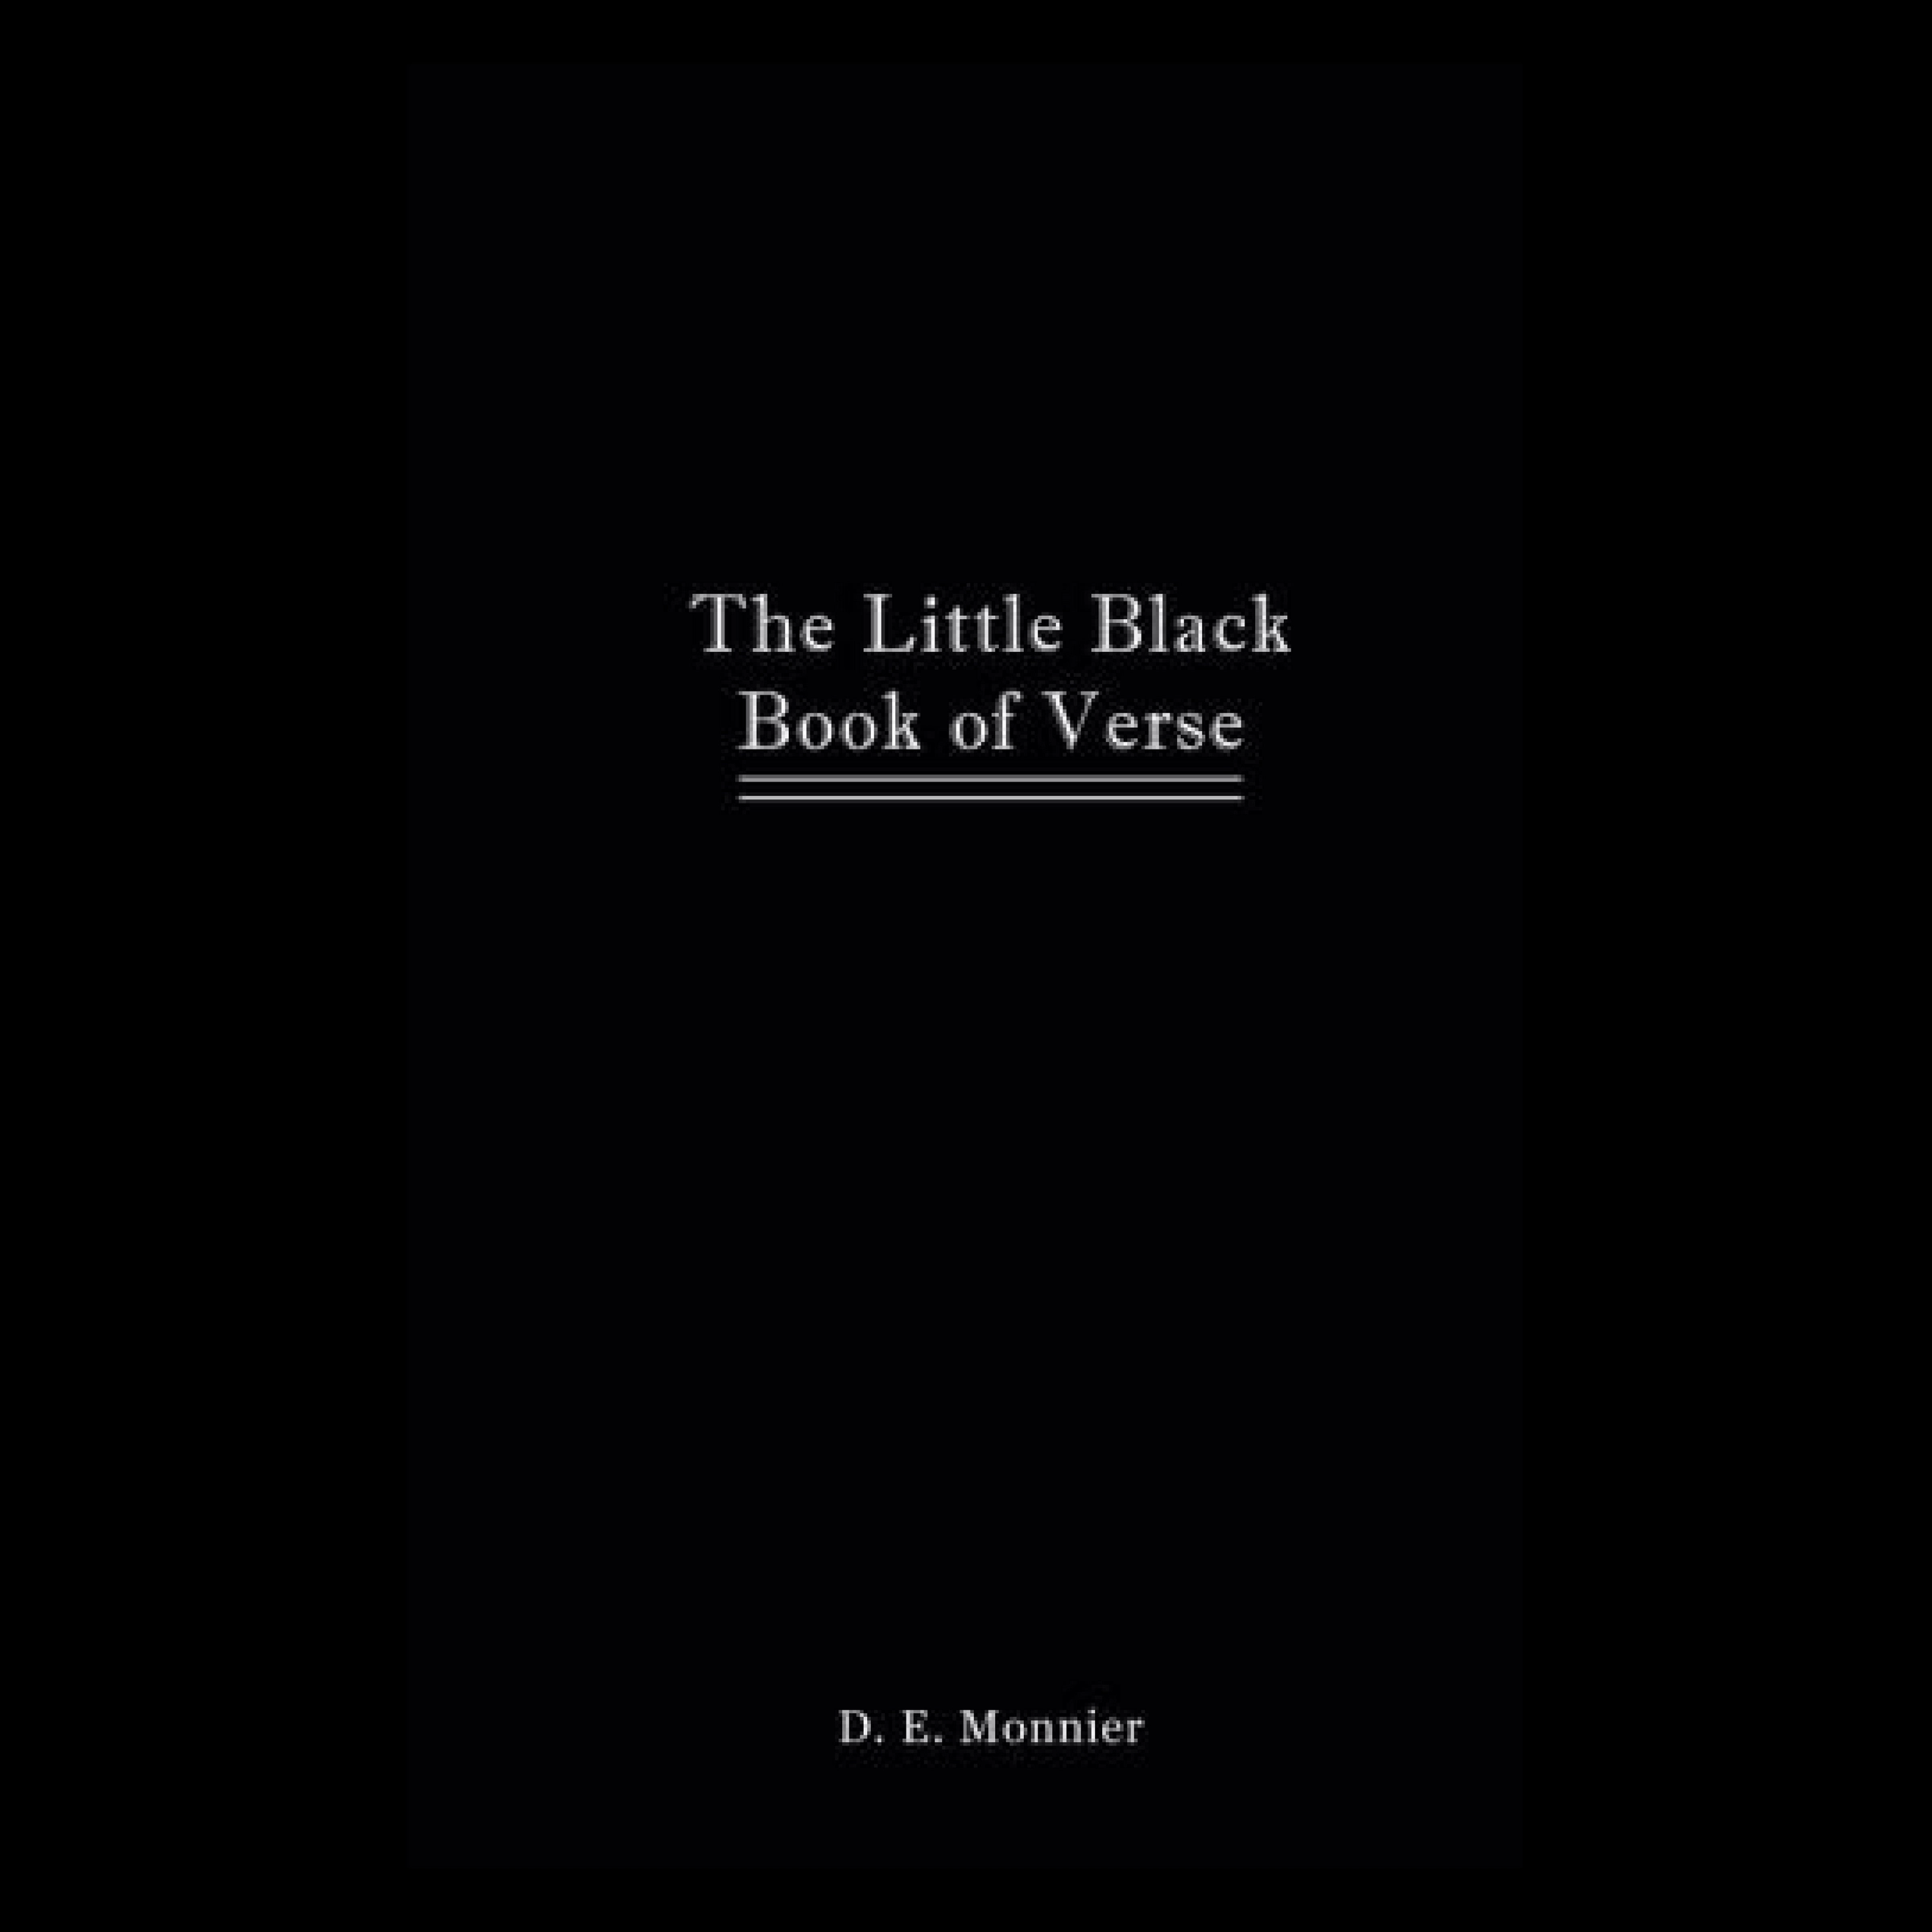 The Little Black Book of Verse Audiobook by D. E. Monnier